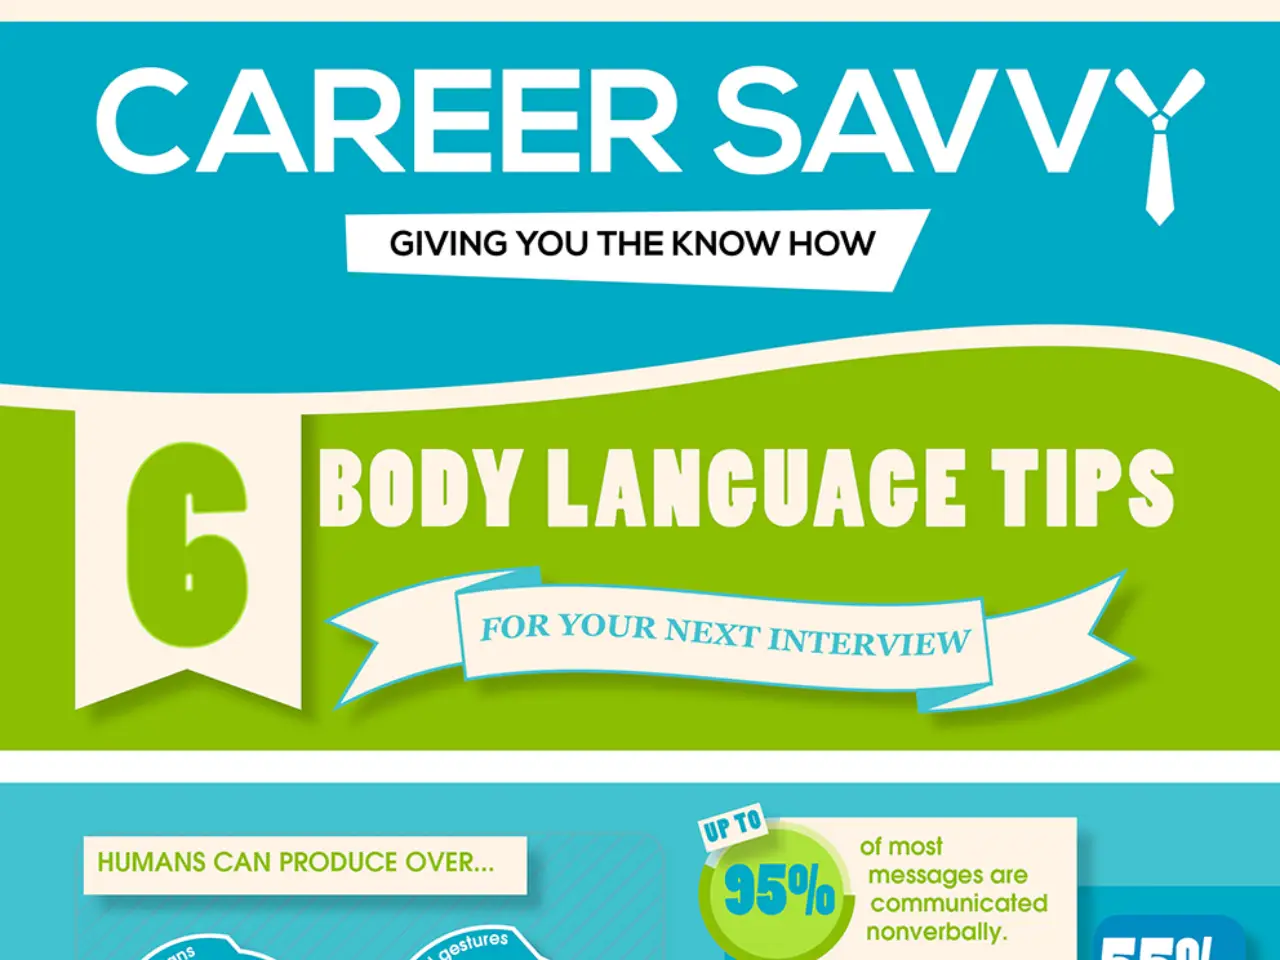 Six Body Language Tips For Your Next Interview